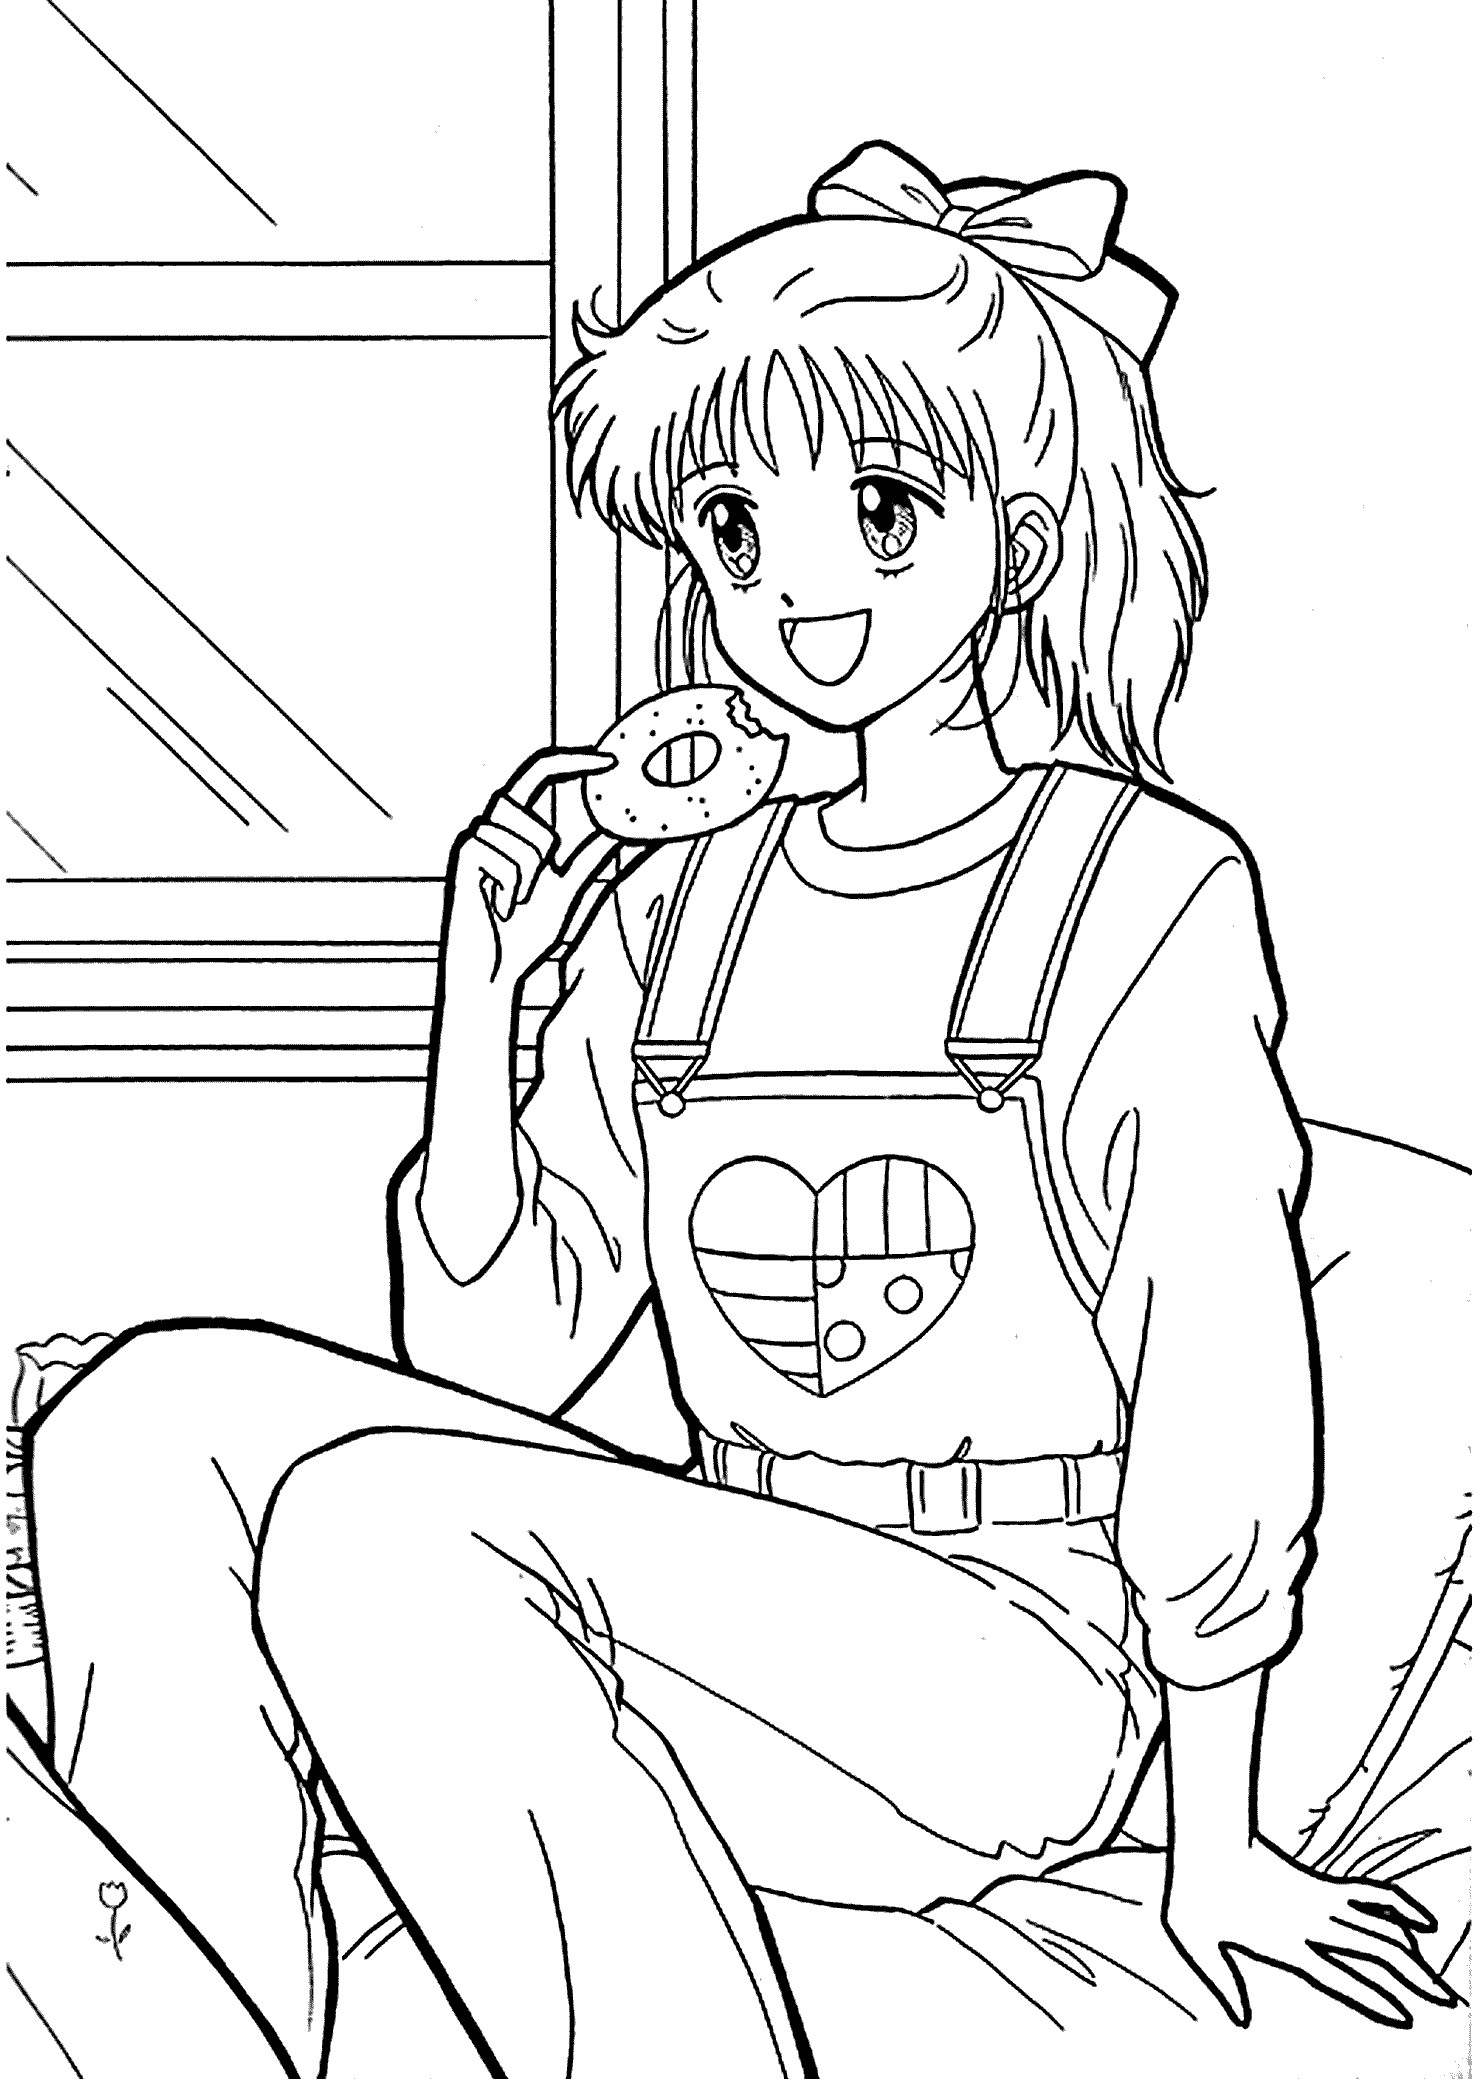 Manga Coloring Pages For Kids
 Miki from Marmalade boy coloring pages for kids printable